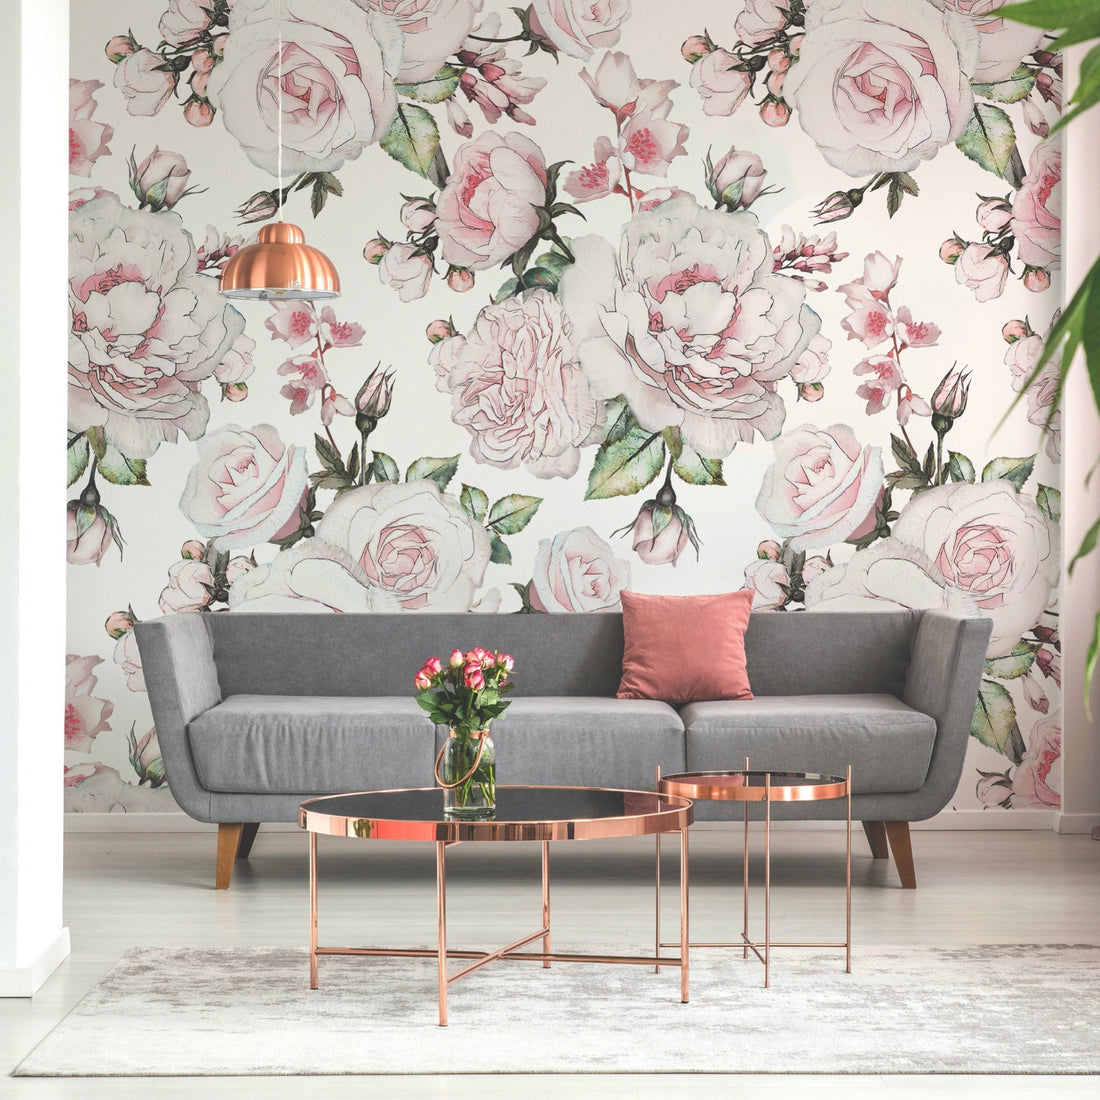 How to Choose Wallpaper the Right Way for Your Interiors